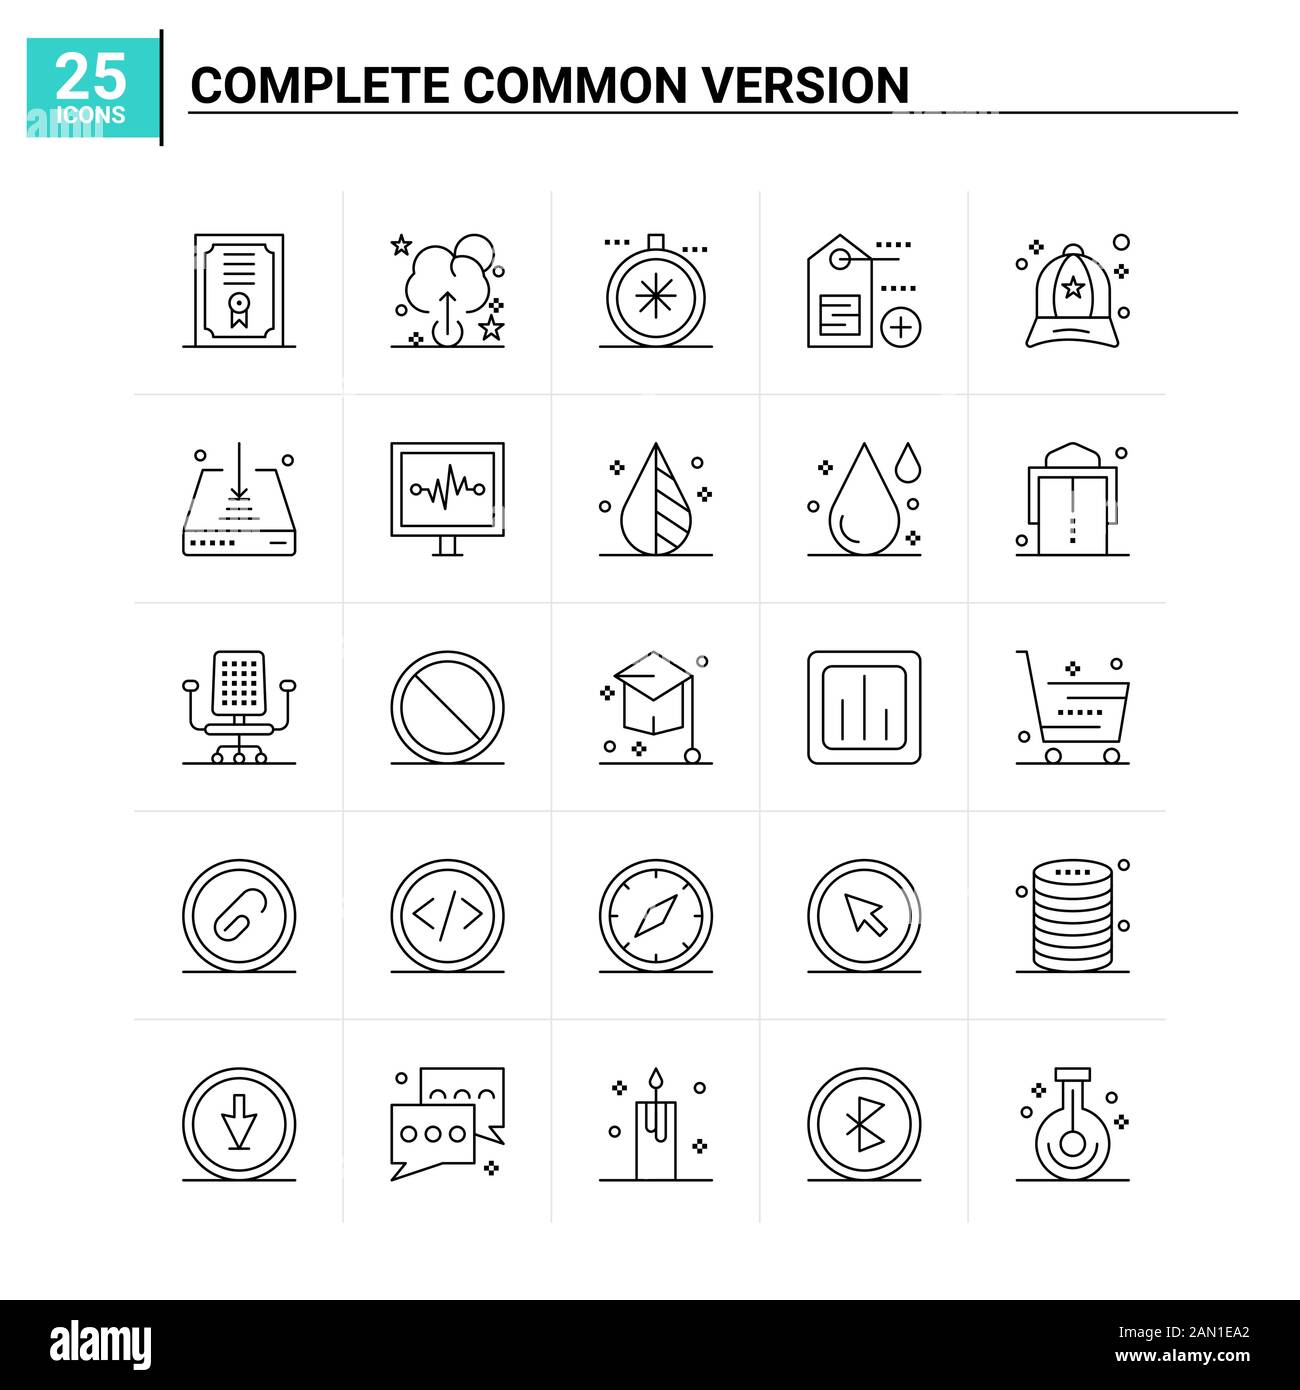 25 Complete Common Version icon set. vector background Stock Vector